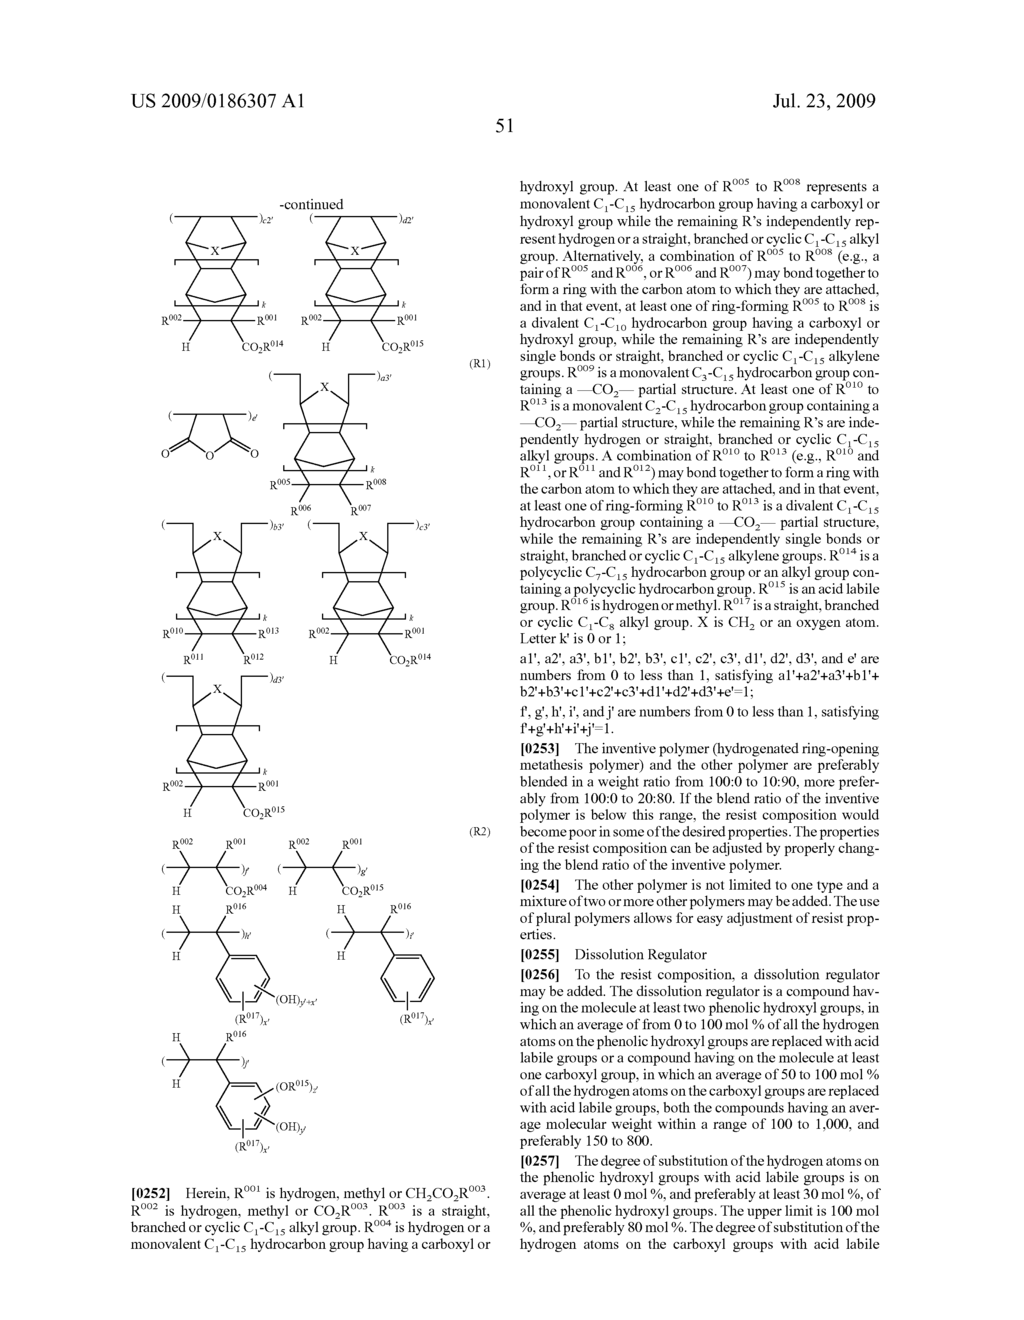 HYDROGENATED RING-OPENING METATHESIS POLYMER, RESIST COMPOSITION AND PATTERNING PROCESS - diagram, schematic, and image 53